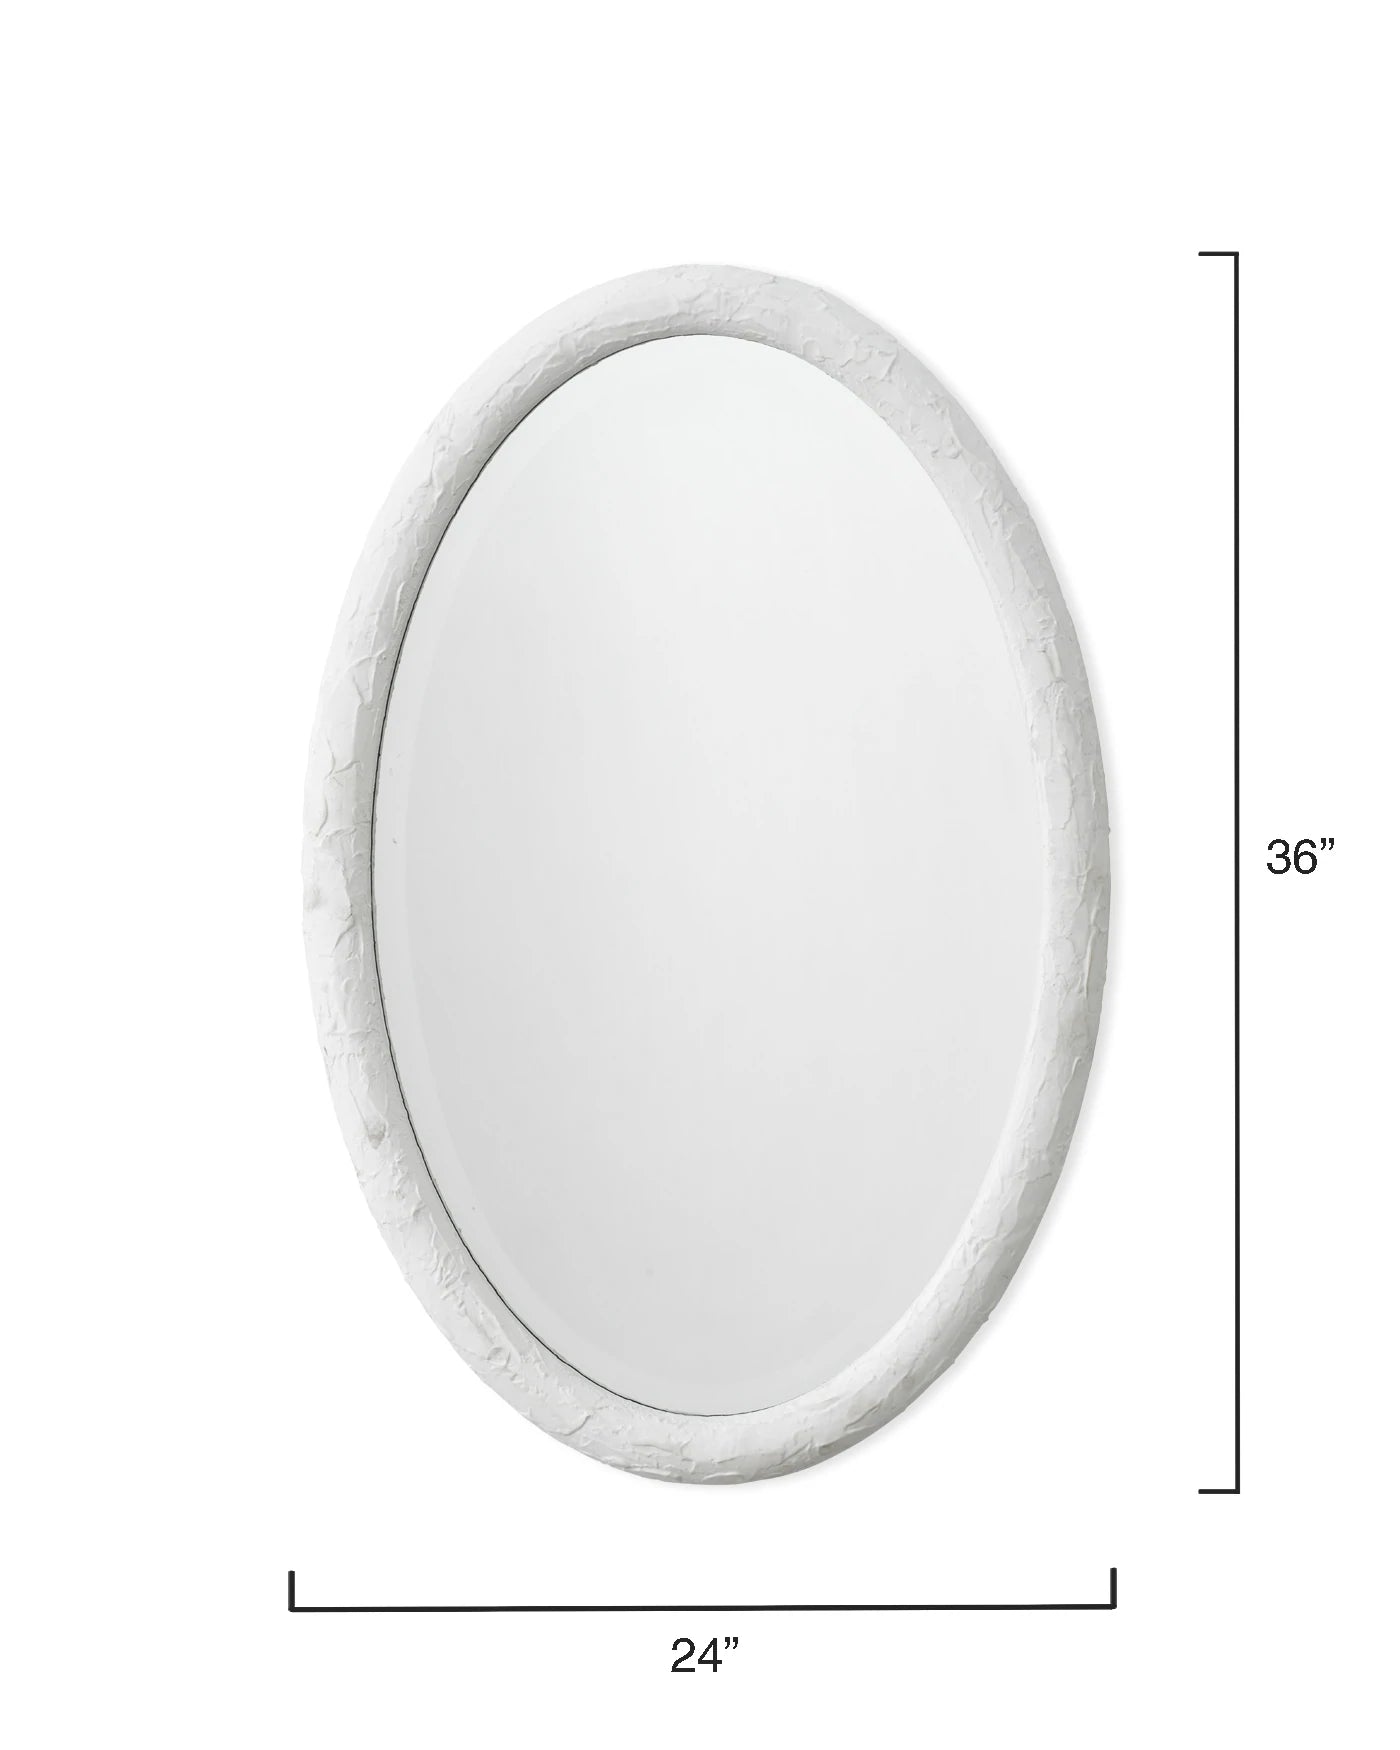 jamie young ovation oval white mirror dimensions